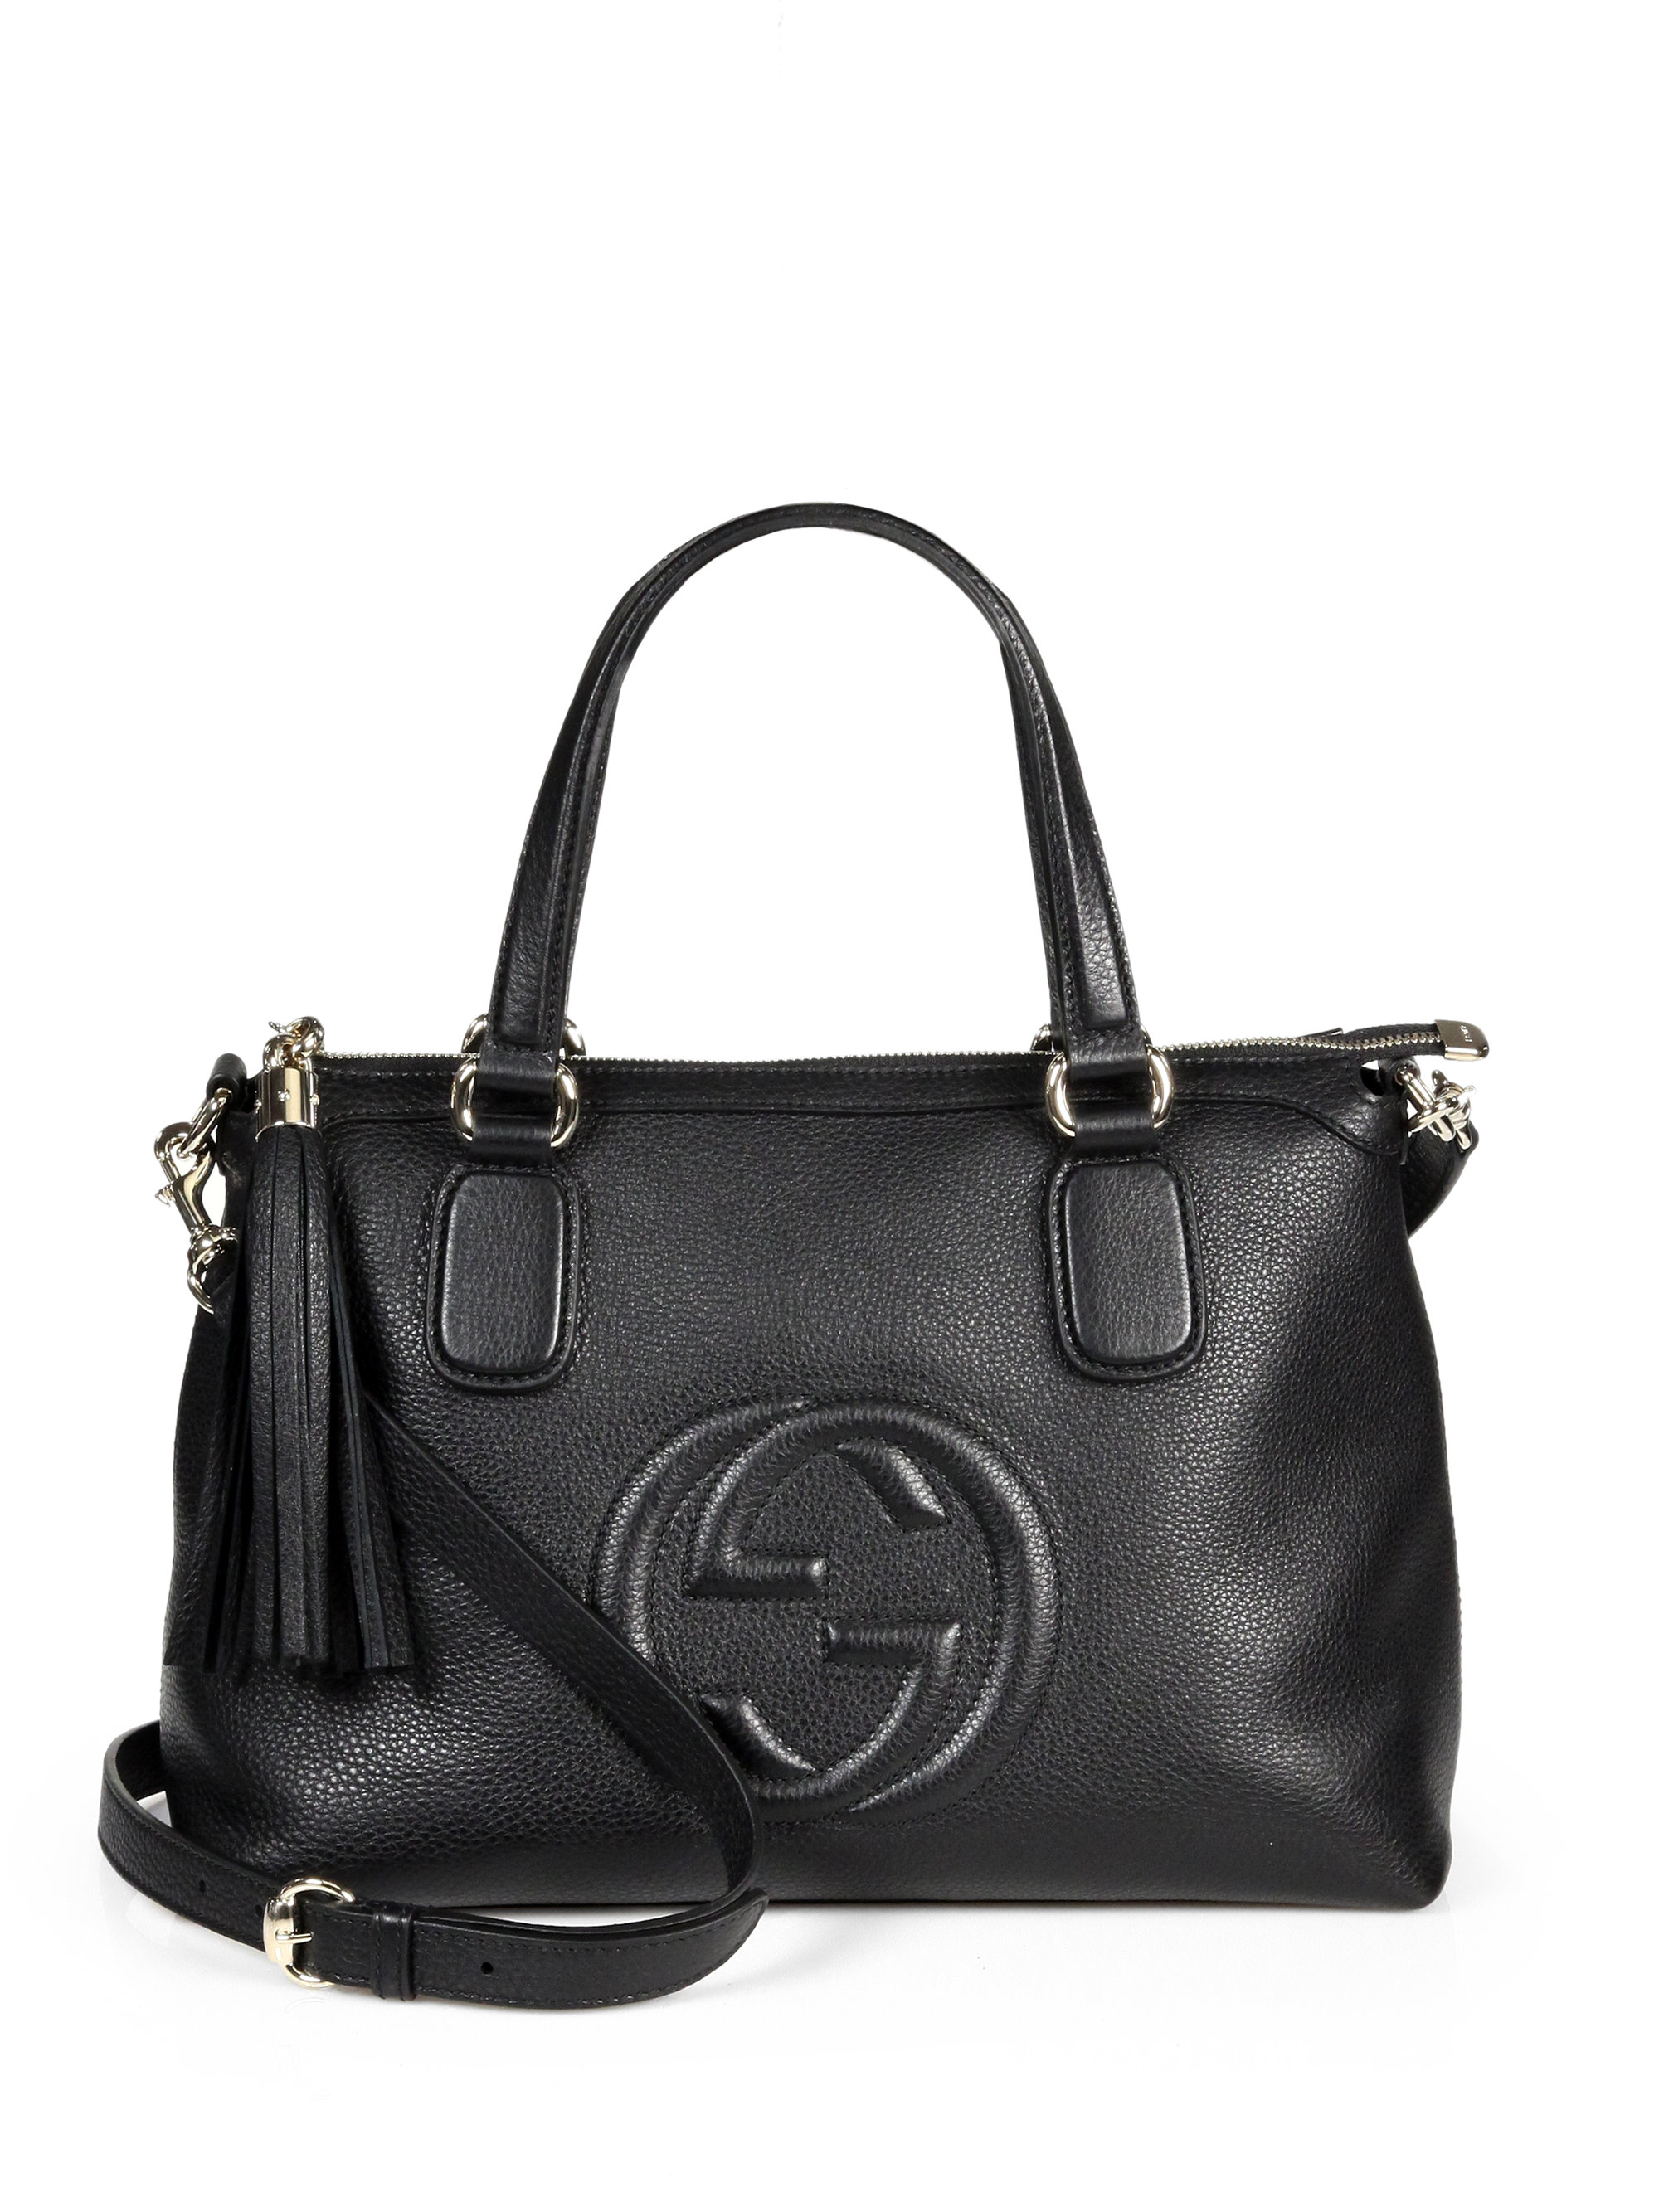 Lyst - Gucci Soho Leather Top Handle Bag in Black